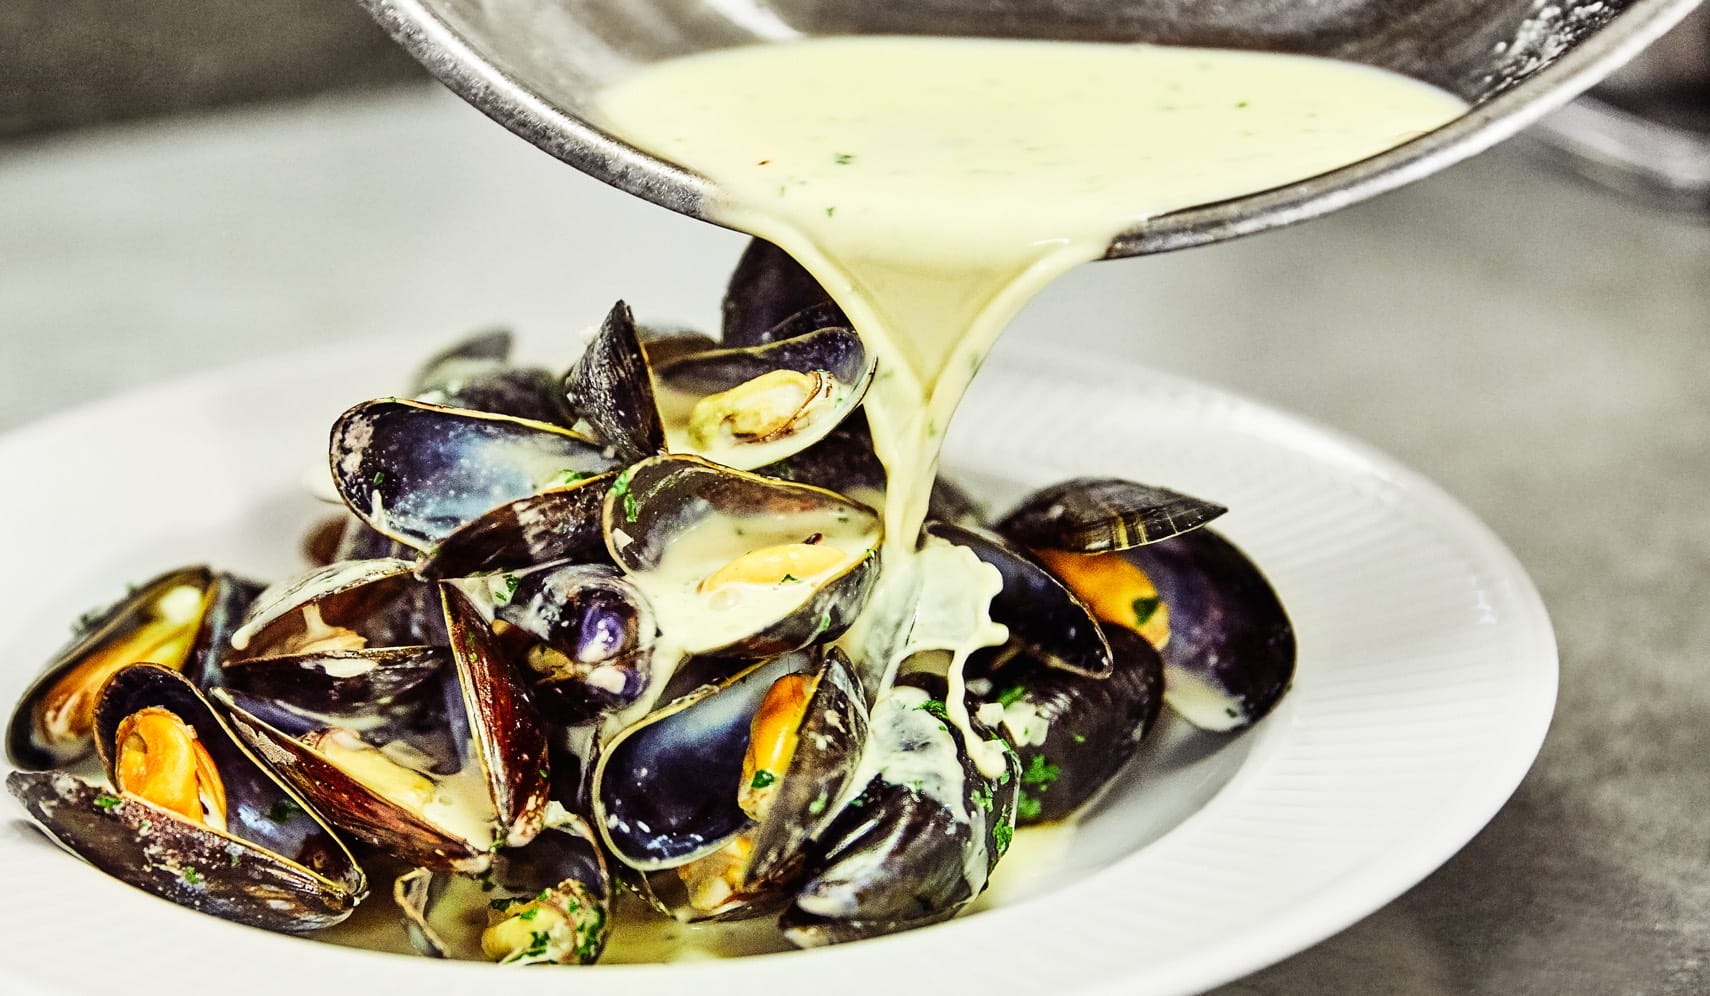 Côte, mussels with cream sauce